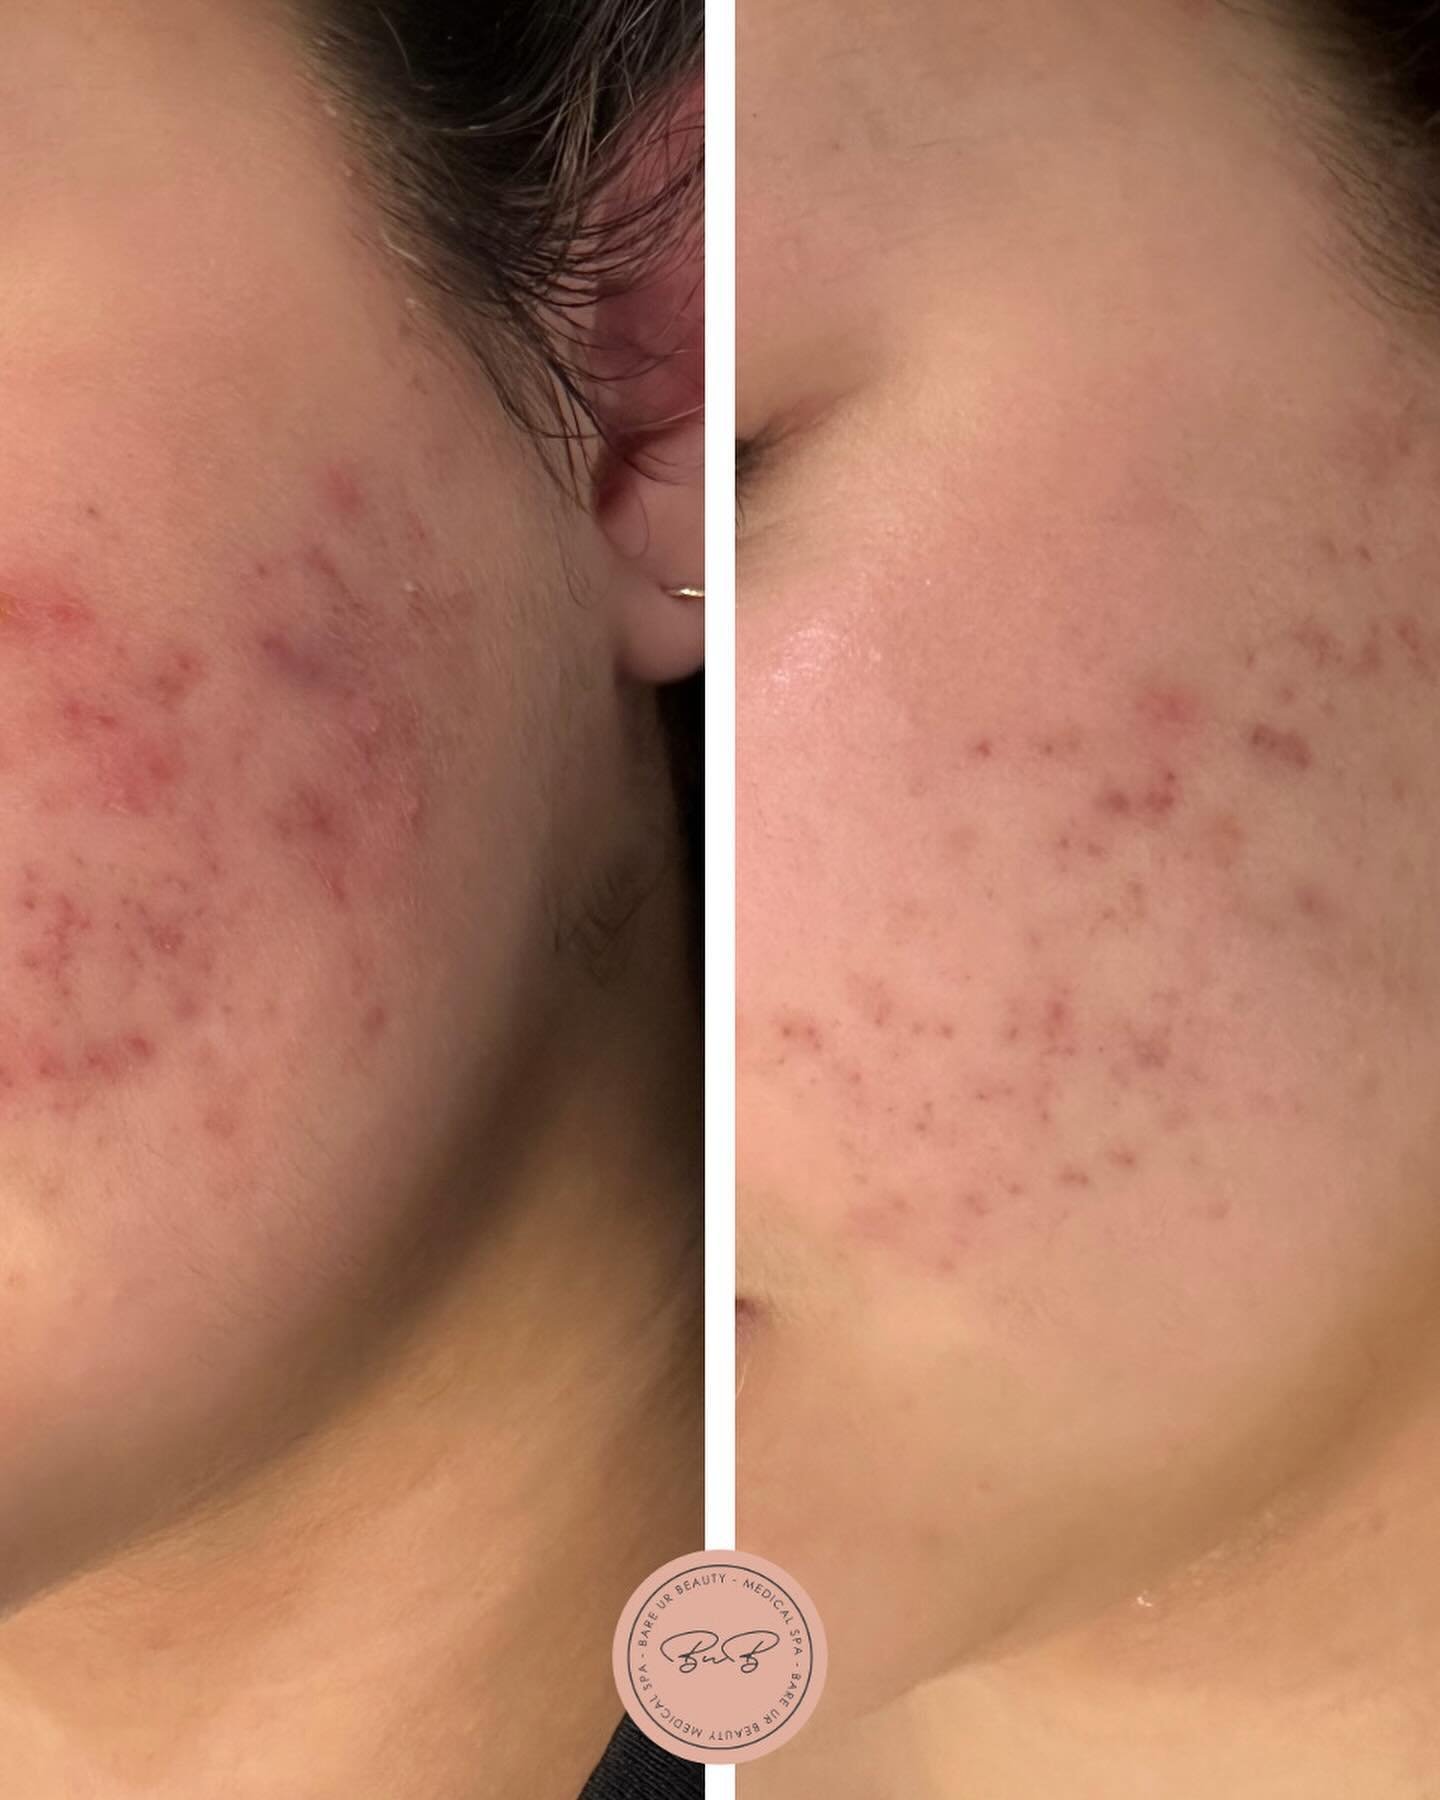 ✨We take the confusion out of Skincare!✨
⠀⠀⠀⠀⠀⠀⠀⠀⠀
This transformation is 6 weeks apart. Check out the incredible progress with these simple, effective products:
⠀⠀⠀⠀⠀⠀⠀⠀⠀
🌿 Seabuckthorn oil 
💦 Hydrinity Mist
🌟 Hydrinity Restorative Serum
☀️ SPF o